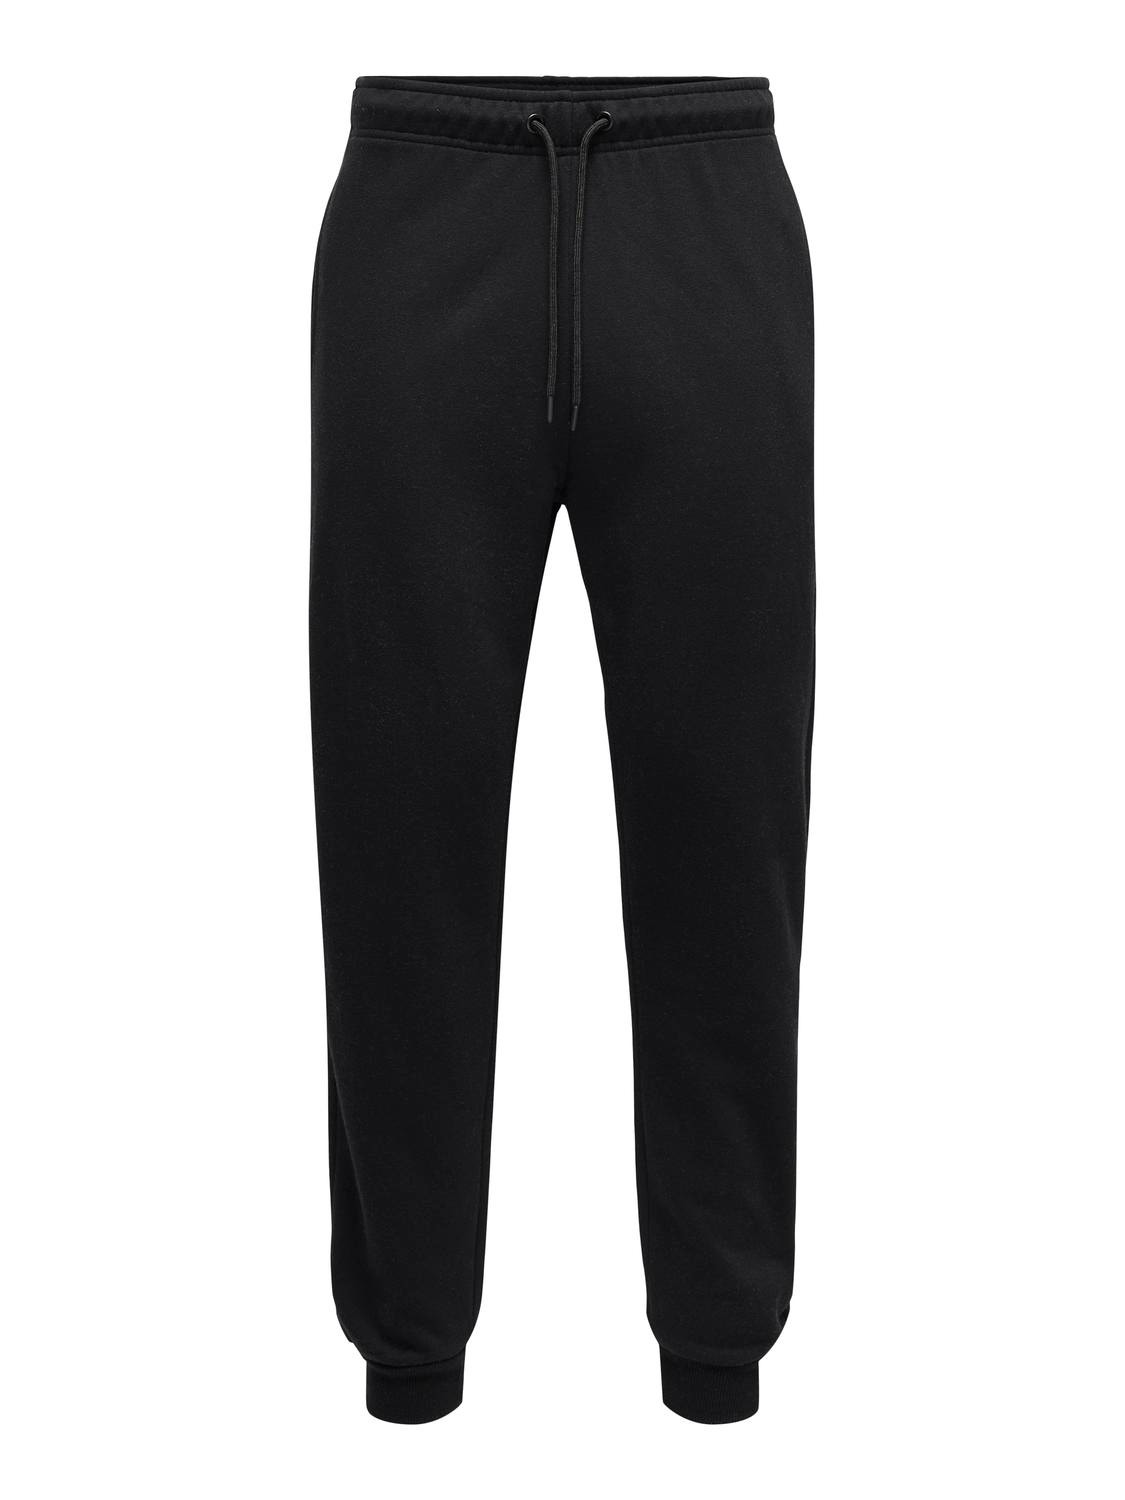 ONLY & SONS Sweat pants -Black - 22018686